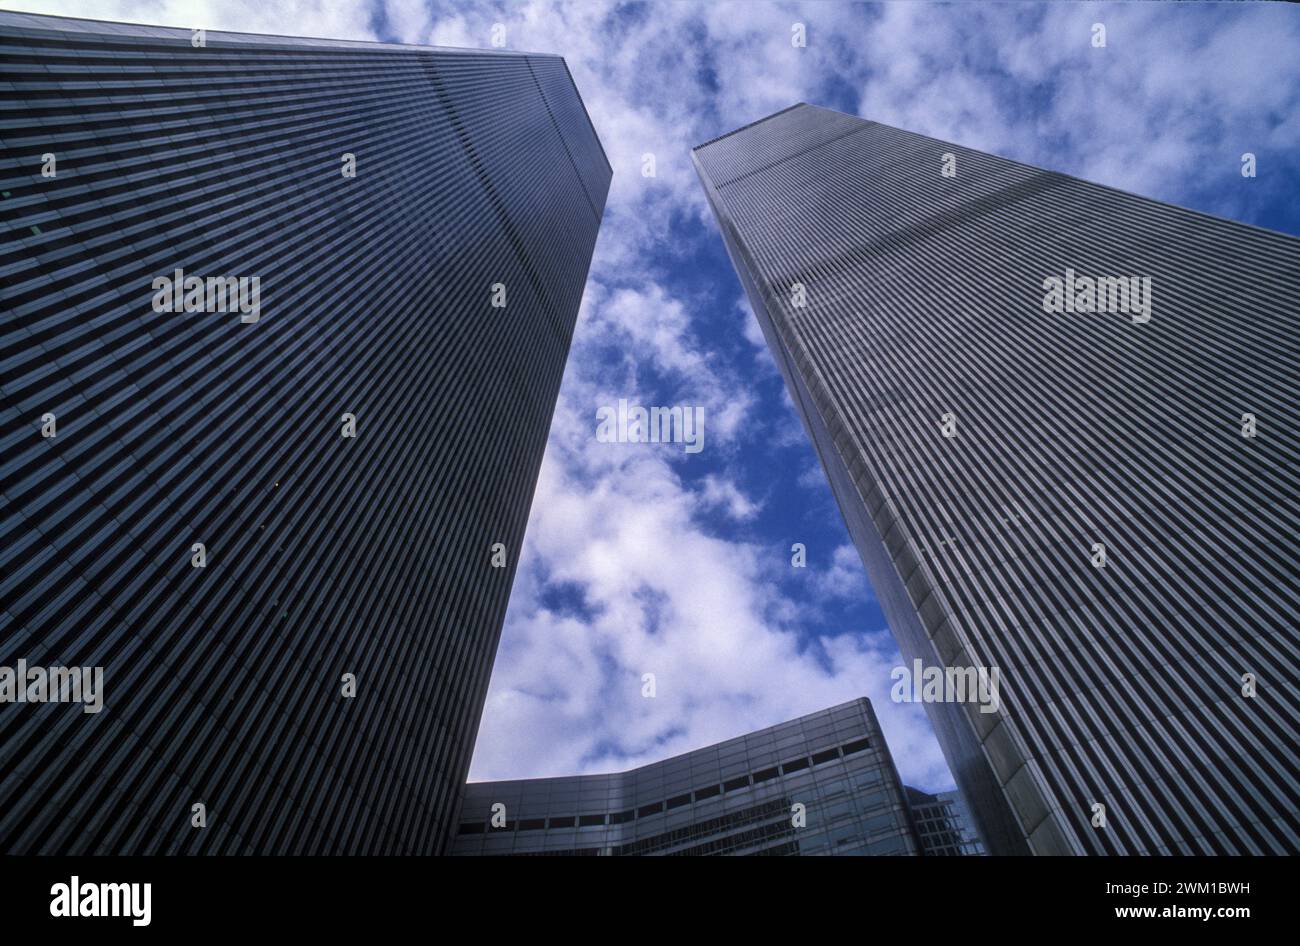 4066804 New York, 1989, The twin towers of the world trade center; (add.info.: New York (1989) New York (1989). Le Torri gemelle del World Trade Center); © Marcello Mencarini. All rights reserved 2024. Stock Photo